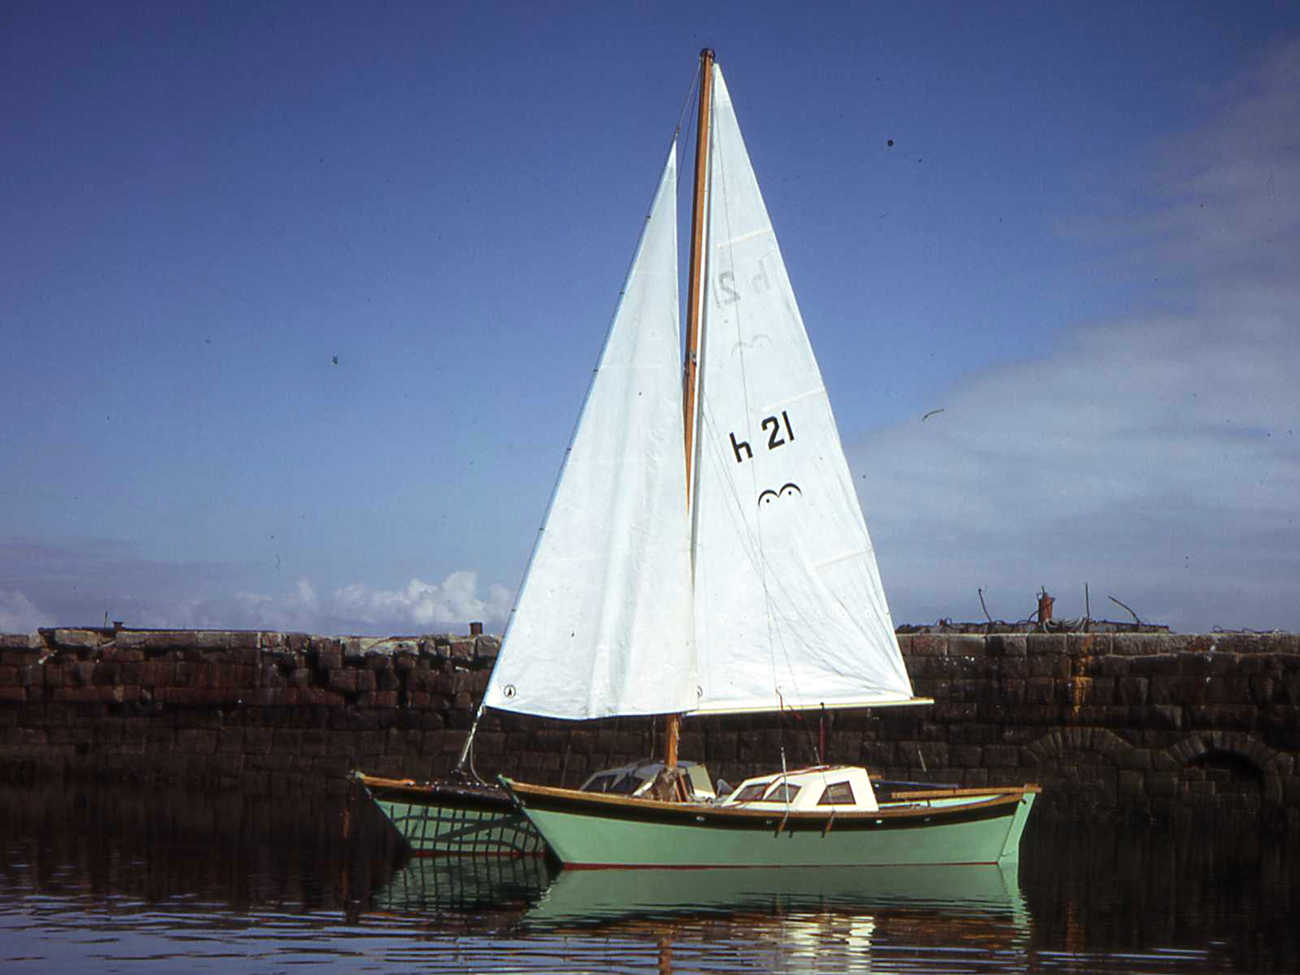 Hinemoa with green hulls and sails up, in a harbour